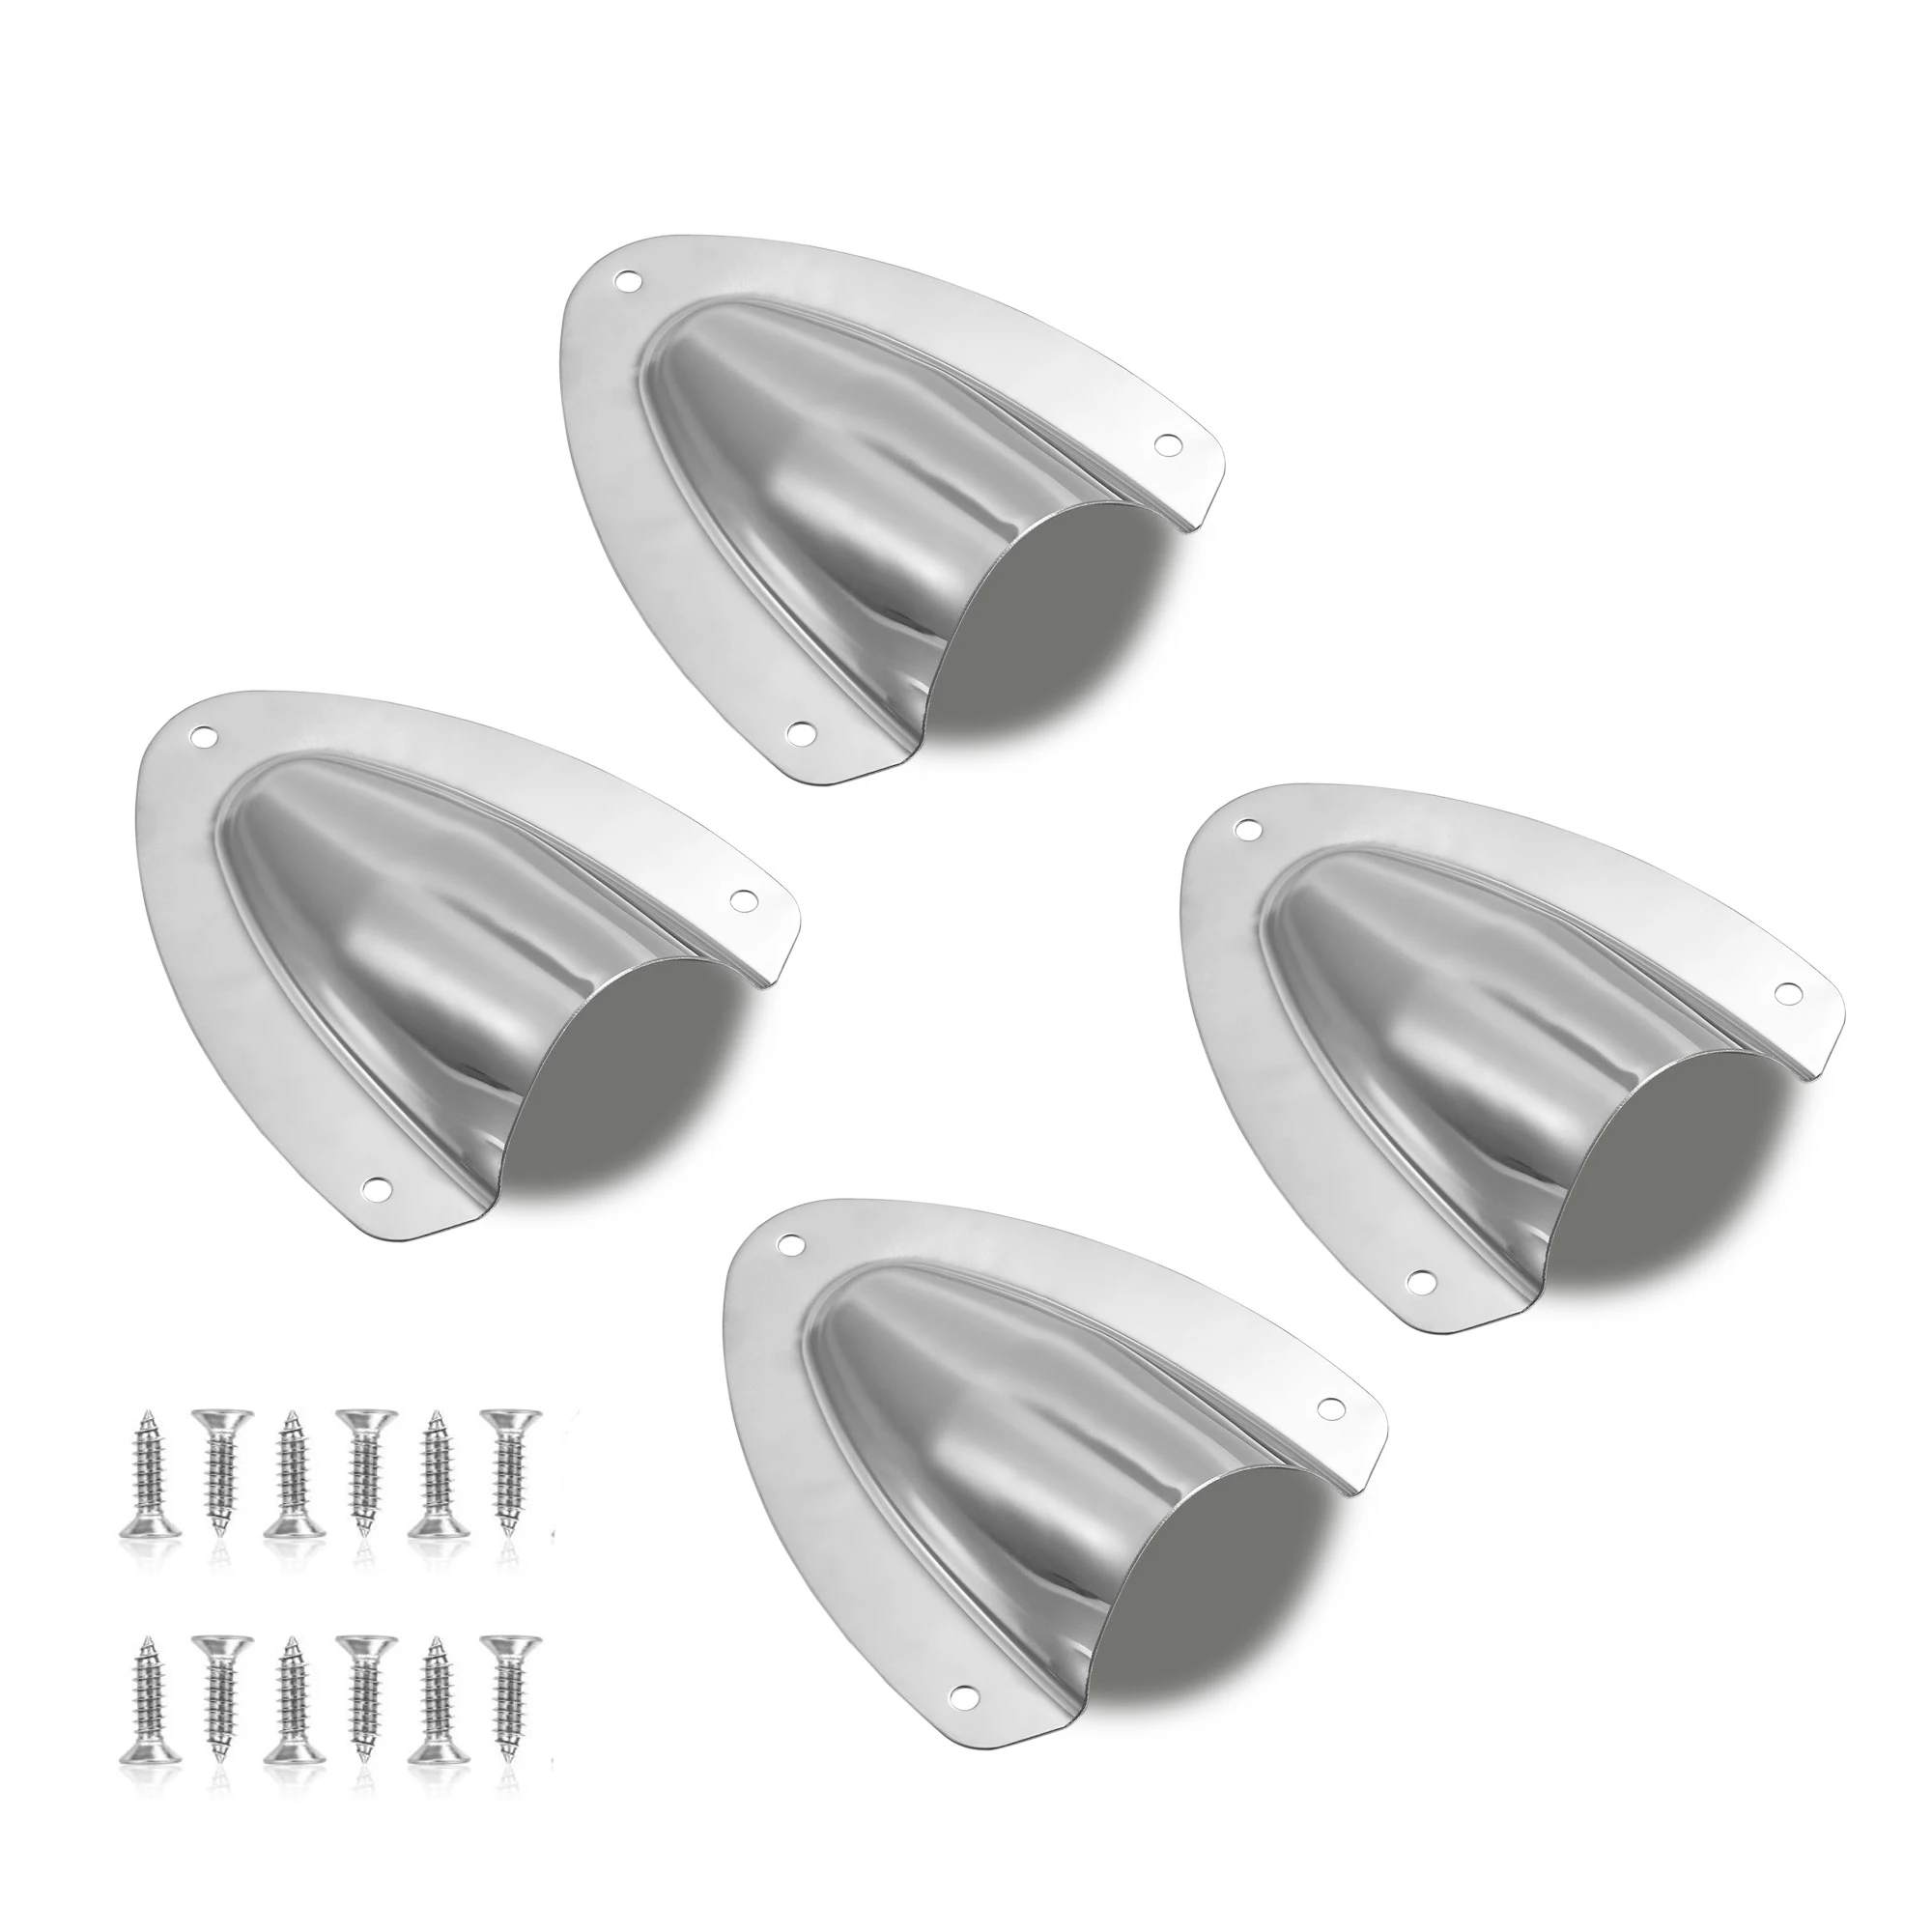 4 Packs Clam shell Vent for Boat, Size 1.53X1.77 Inch (39X45mm ), Stainless Steel Clamshell Vent, with 12 Pcs Screws